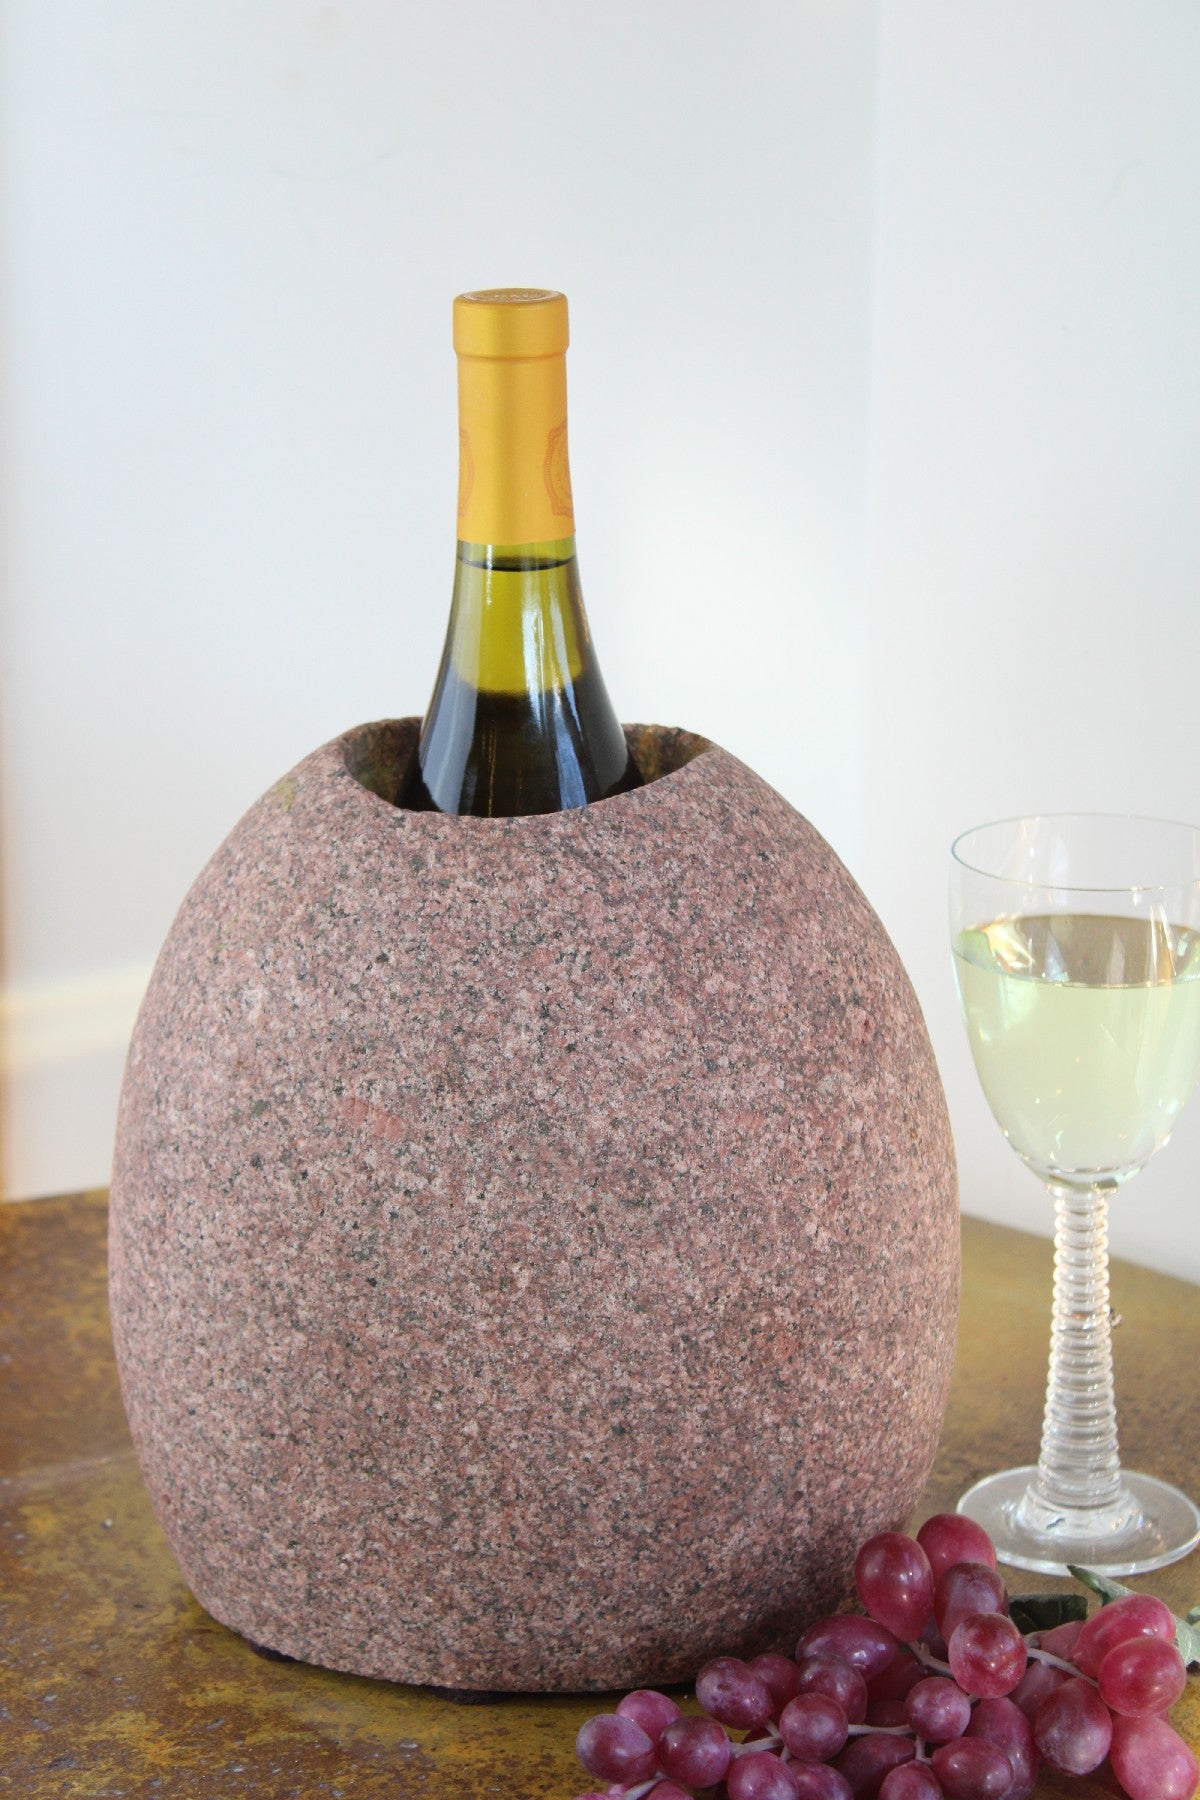 https://cdn.shopify.com/s/files/1/0274/0643/4356/products/W117-1921Stone-Wine-Chiller.jpg?v=1611357543